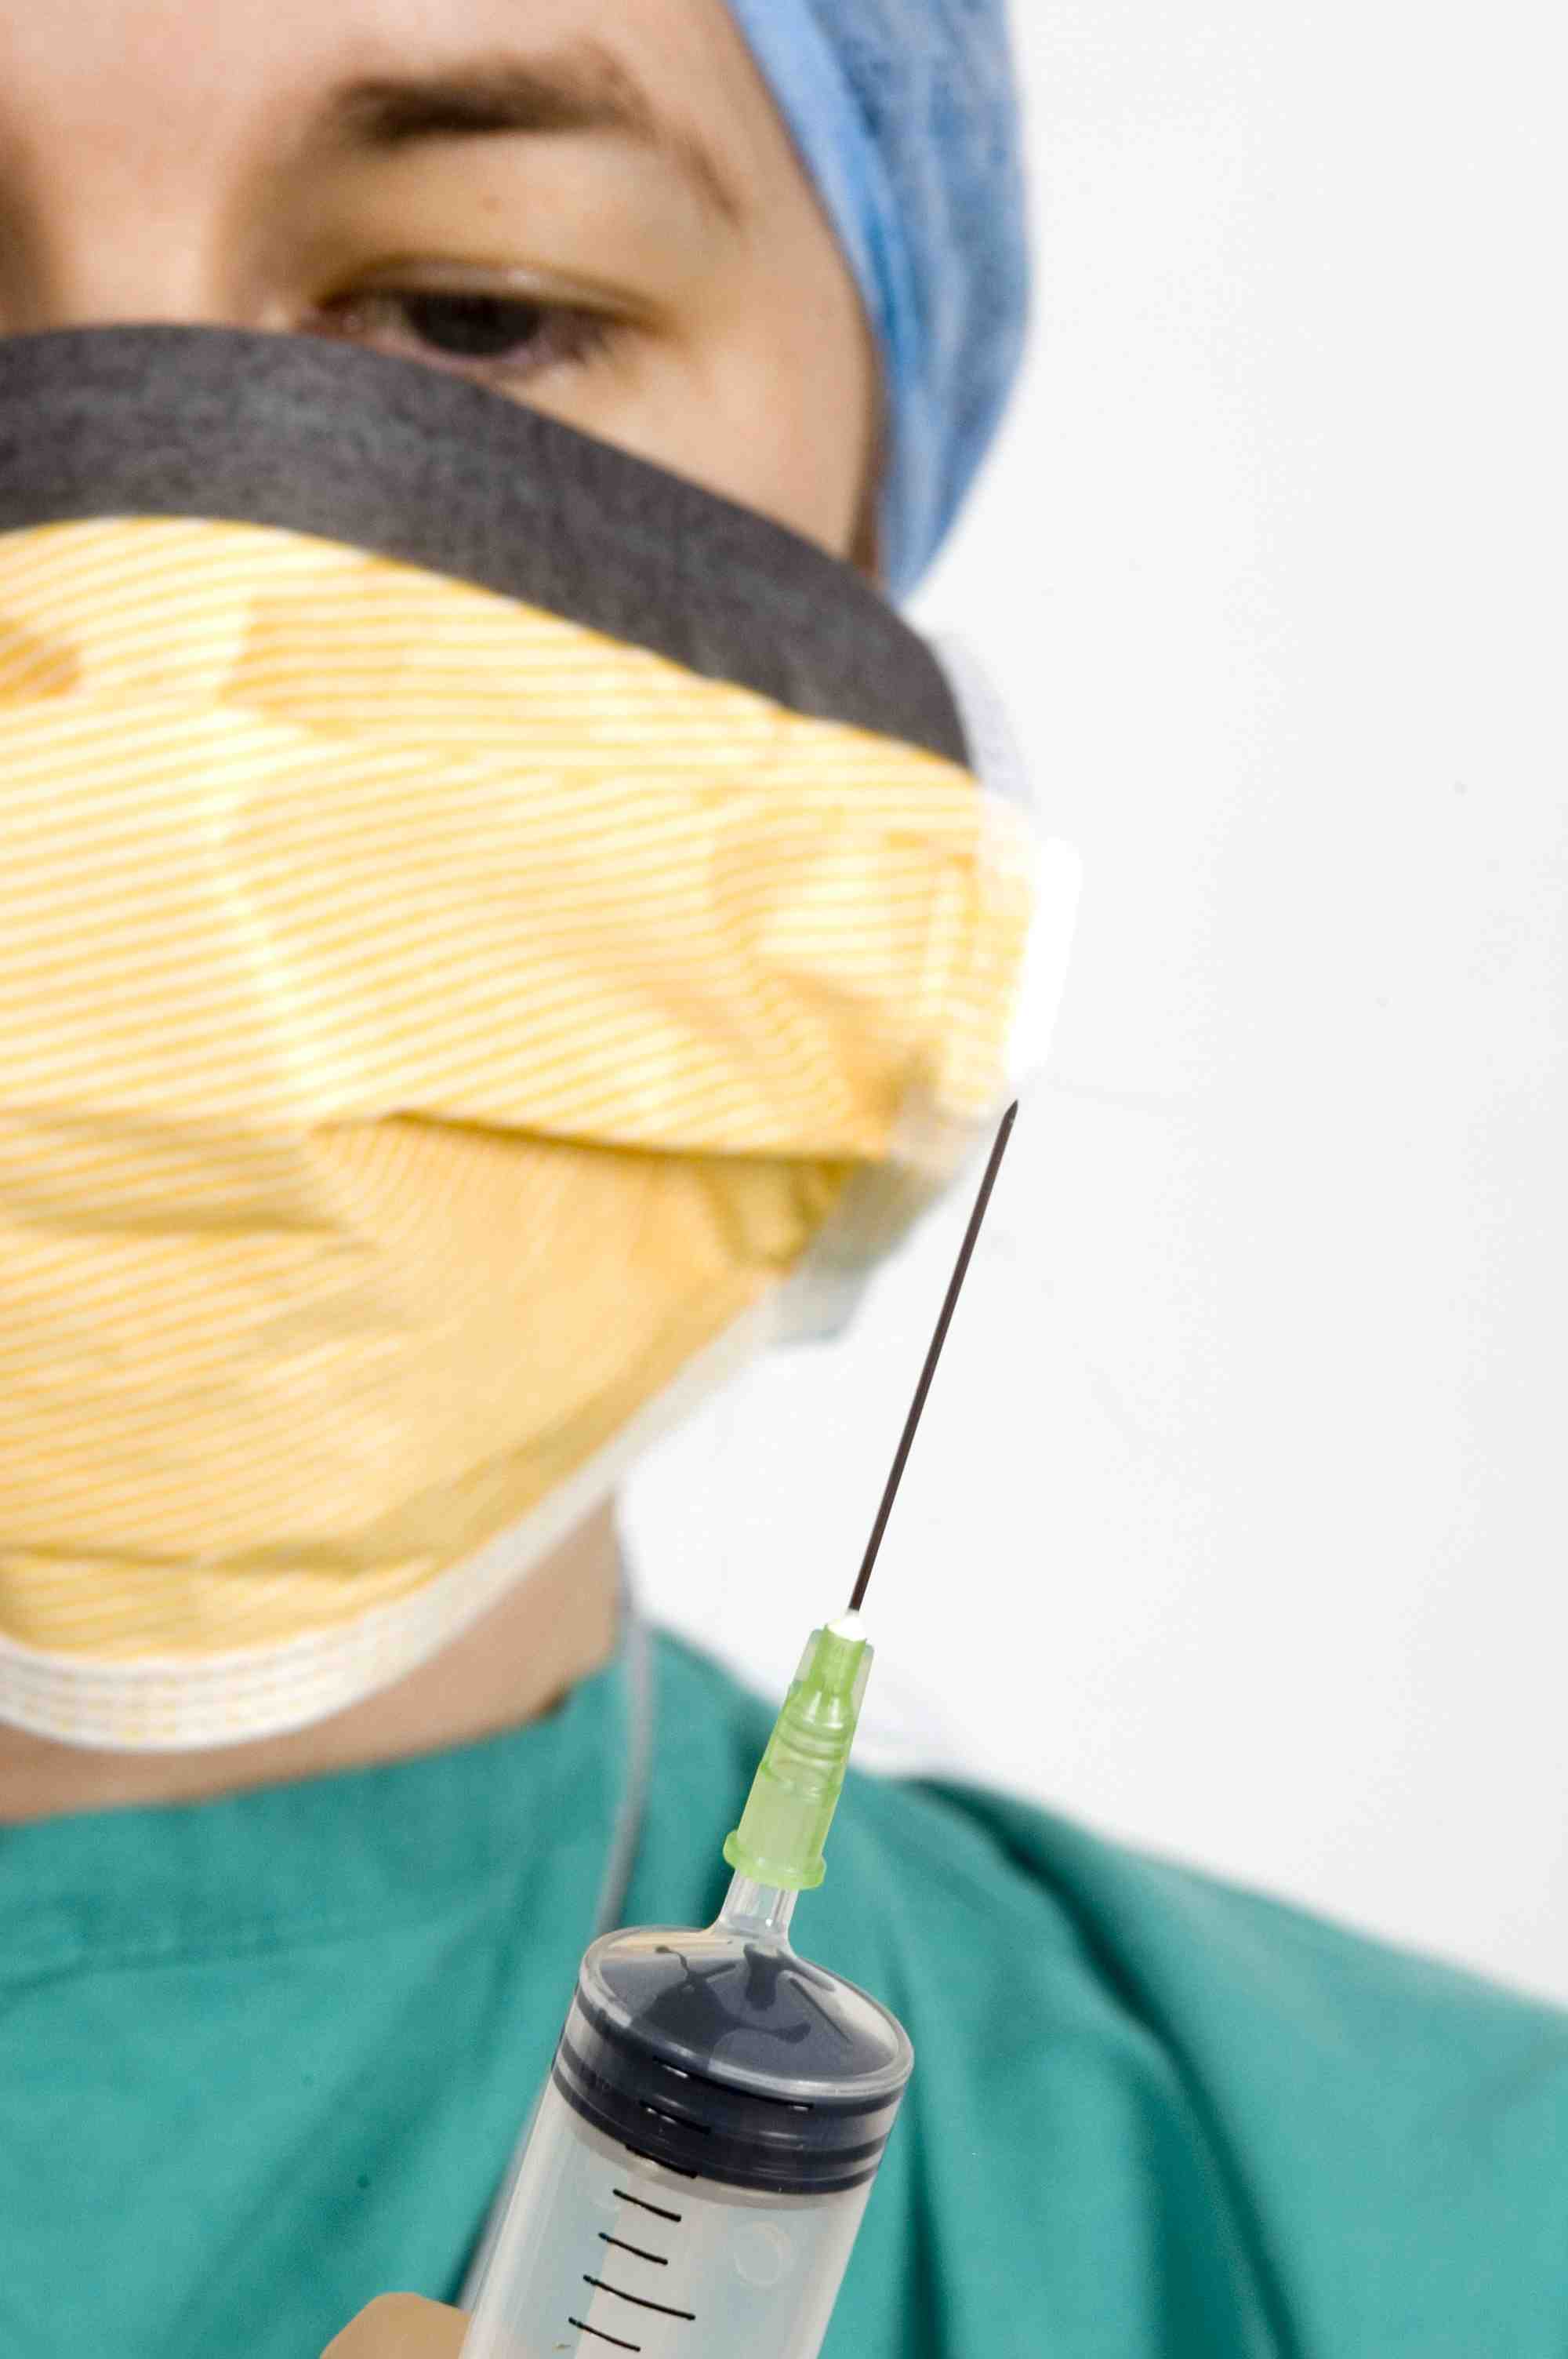 Under the Knife: The Psychological Impact of Cosmetic Surgery